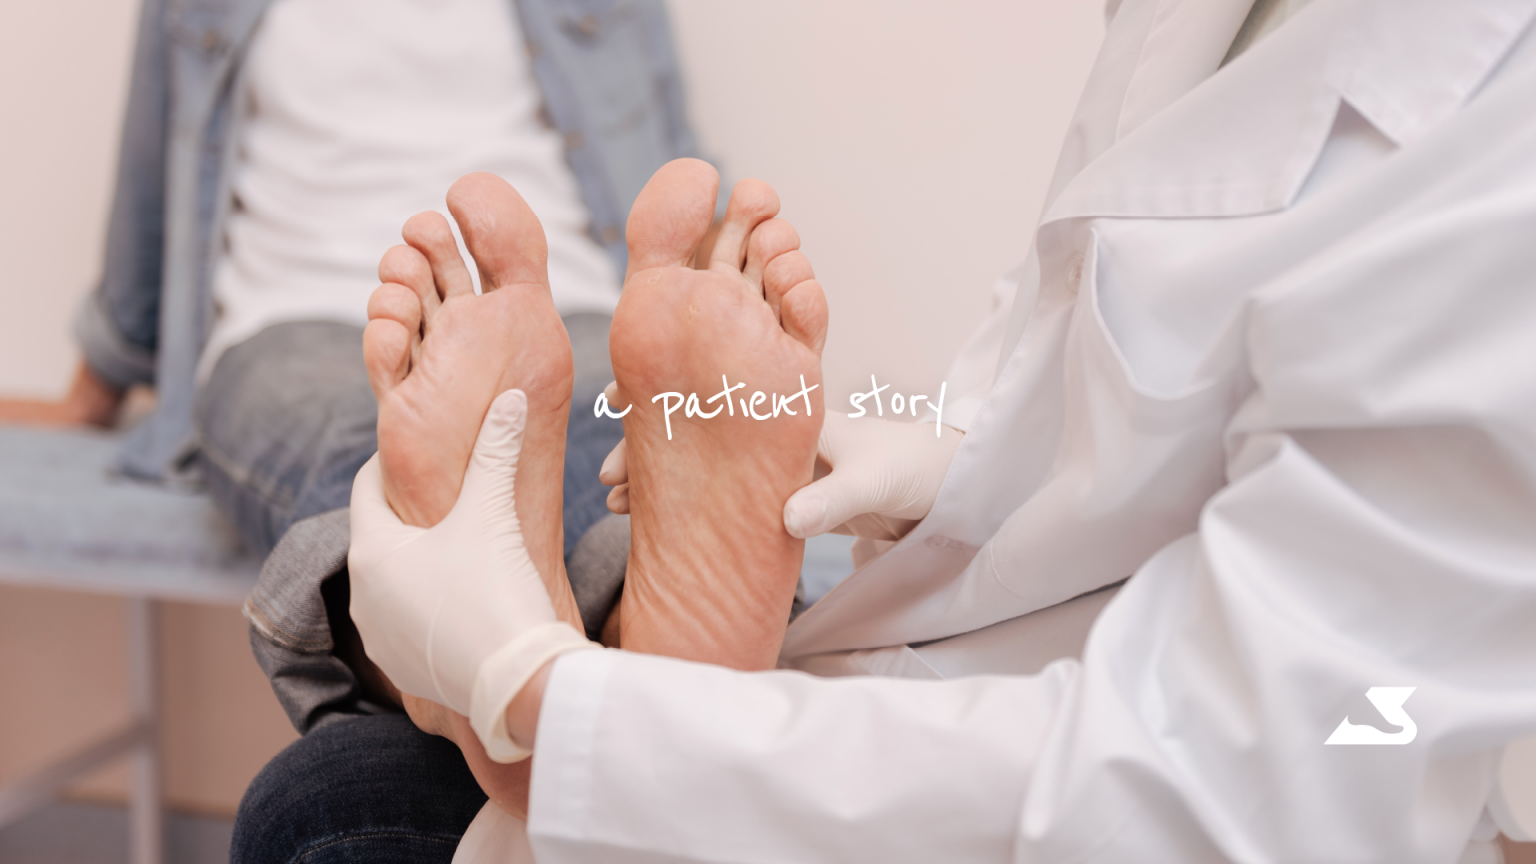 A Patient’s Story – Benefits from properly fitting footwear